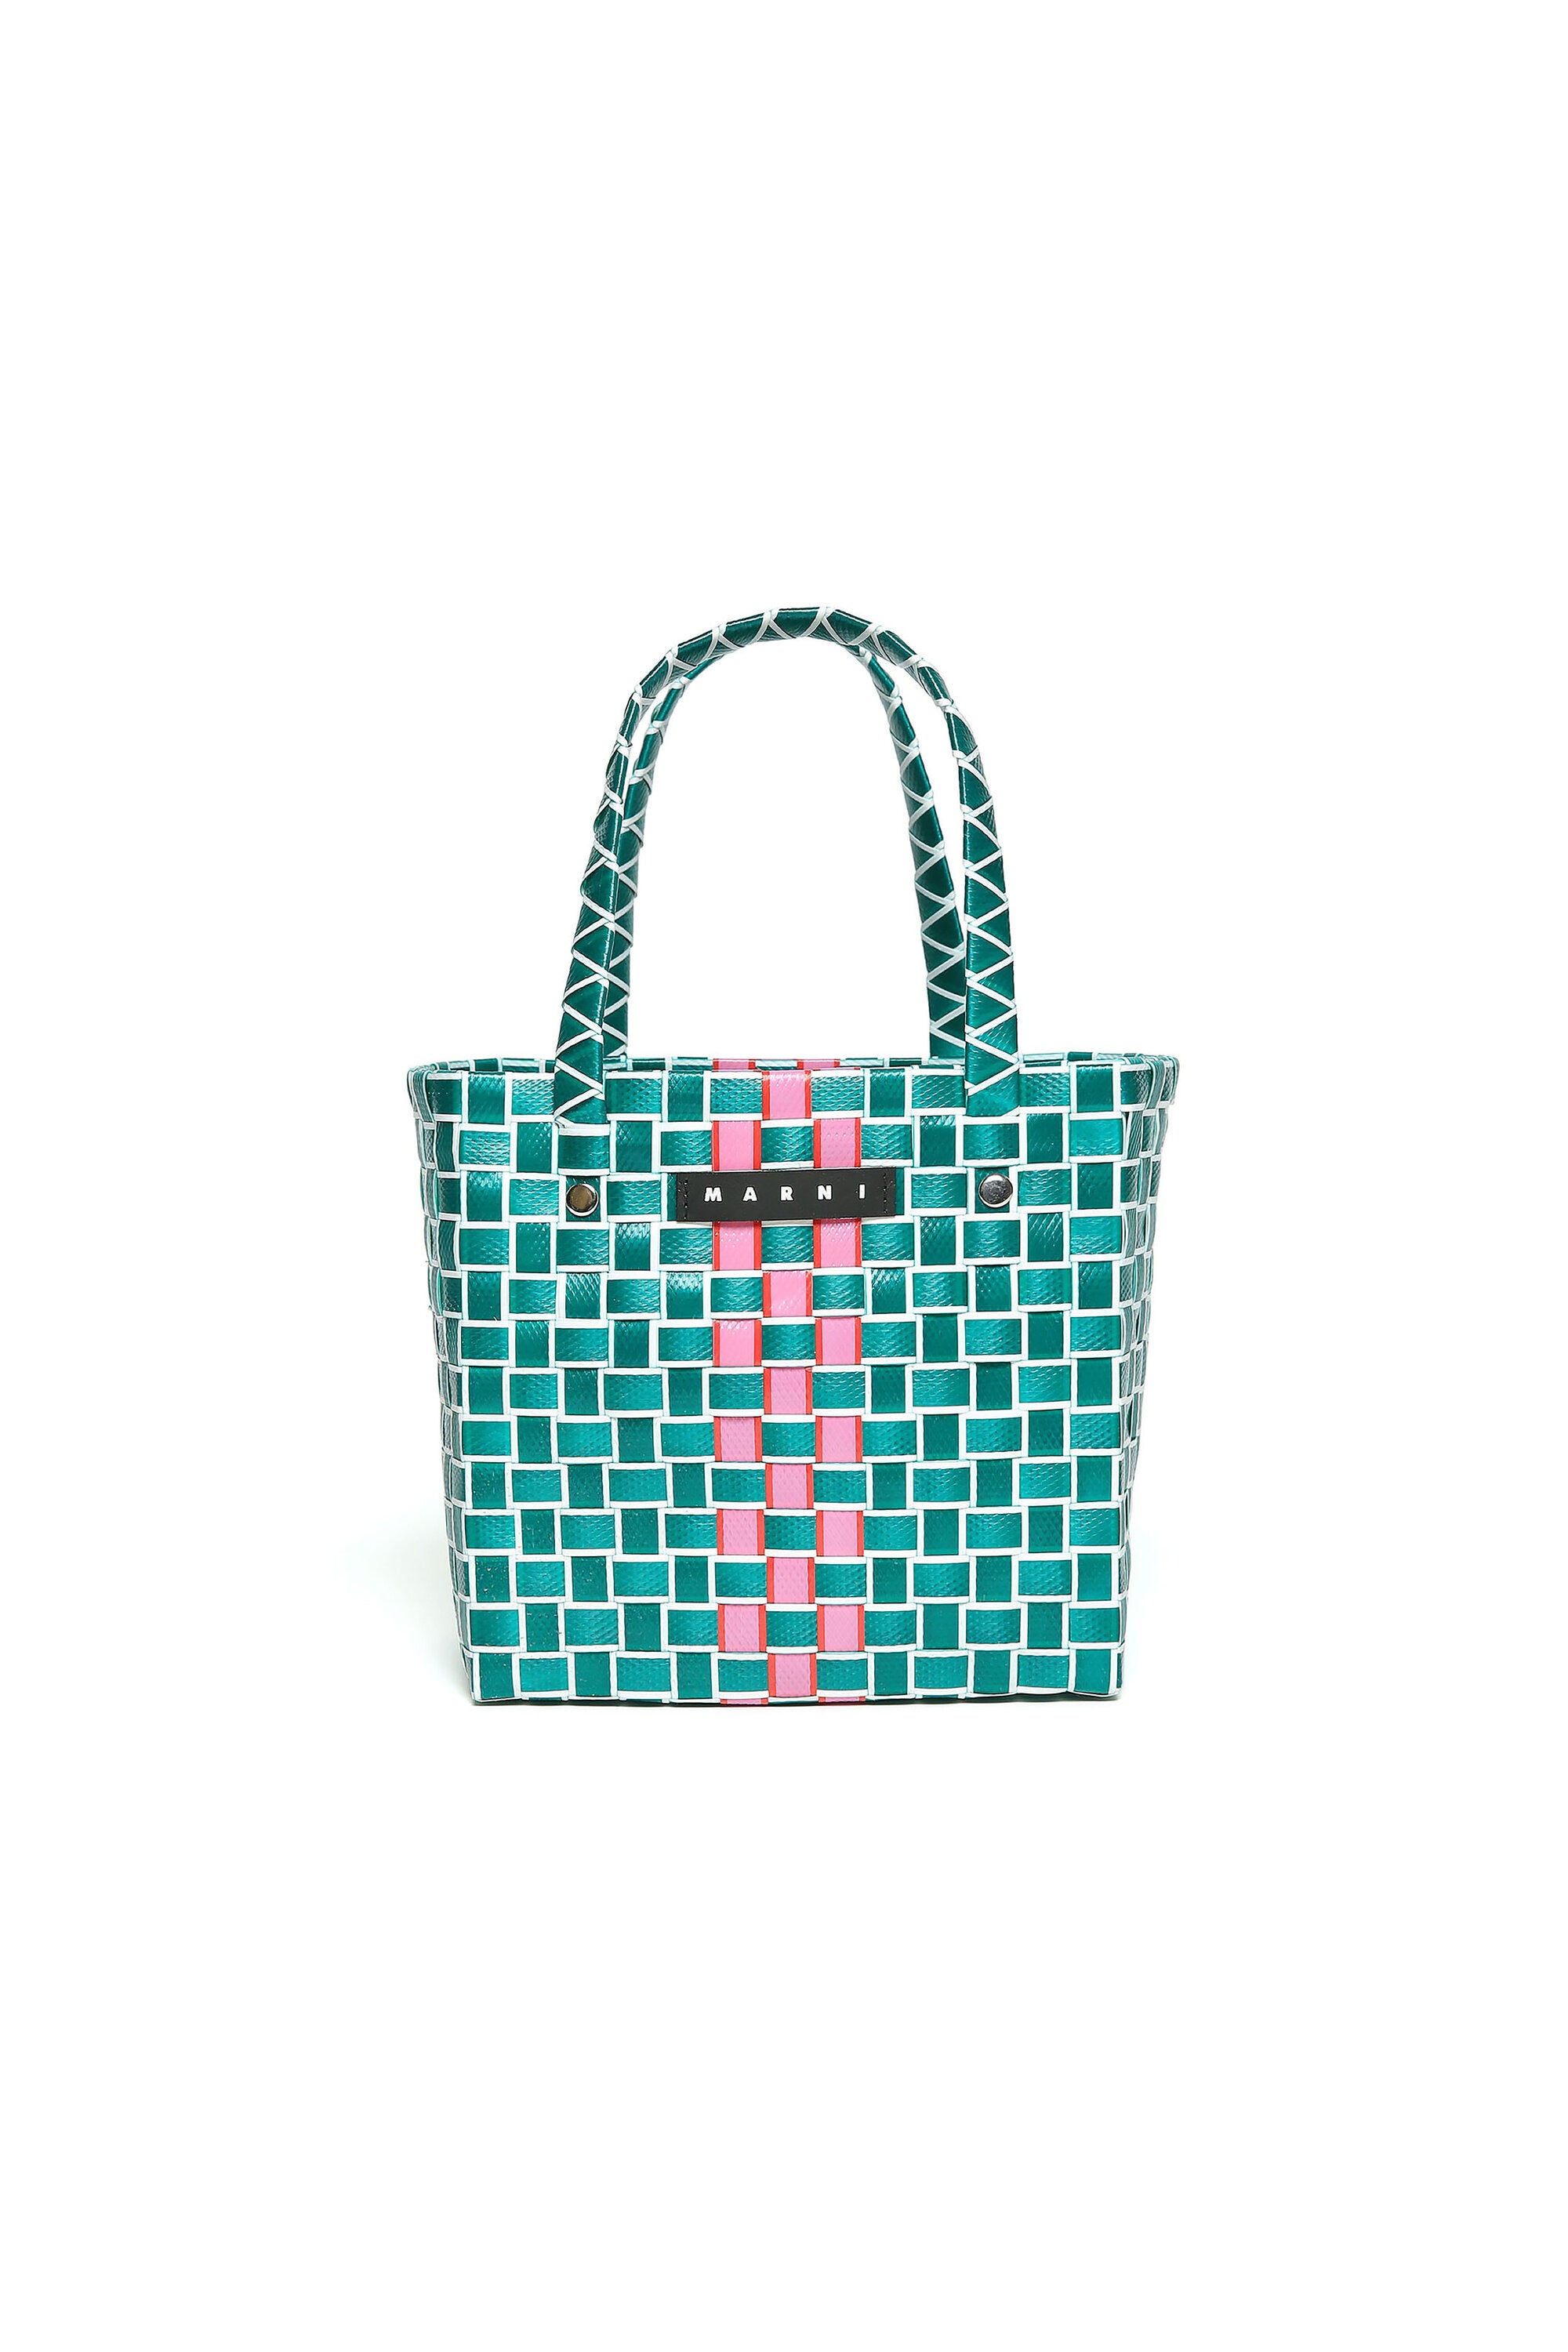 Marni green woven box bag with handles and applied logo for